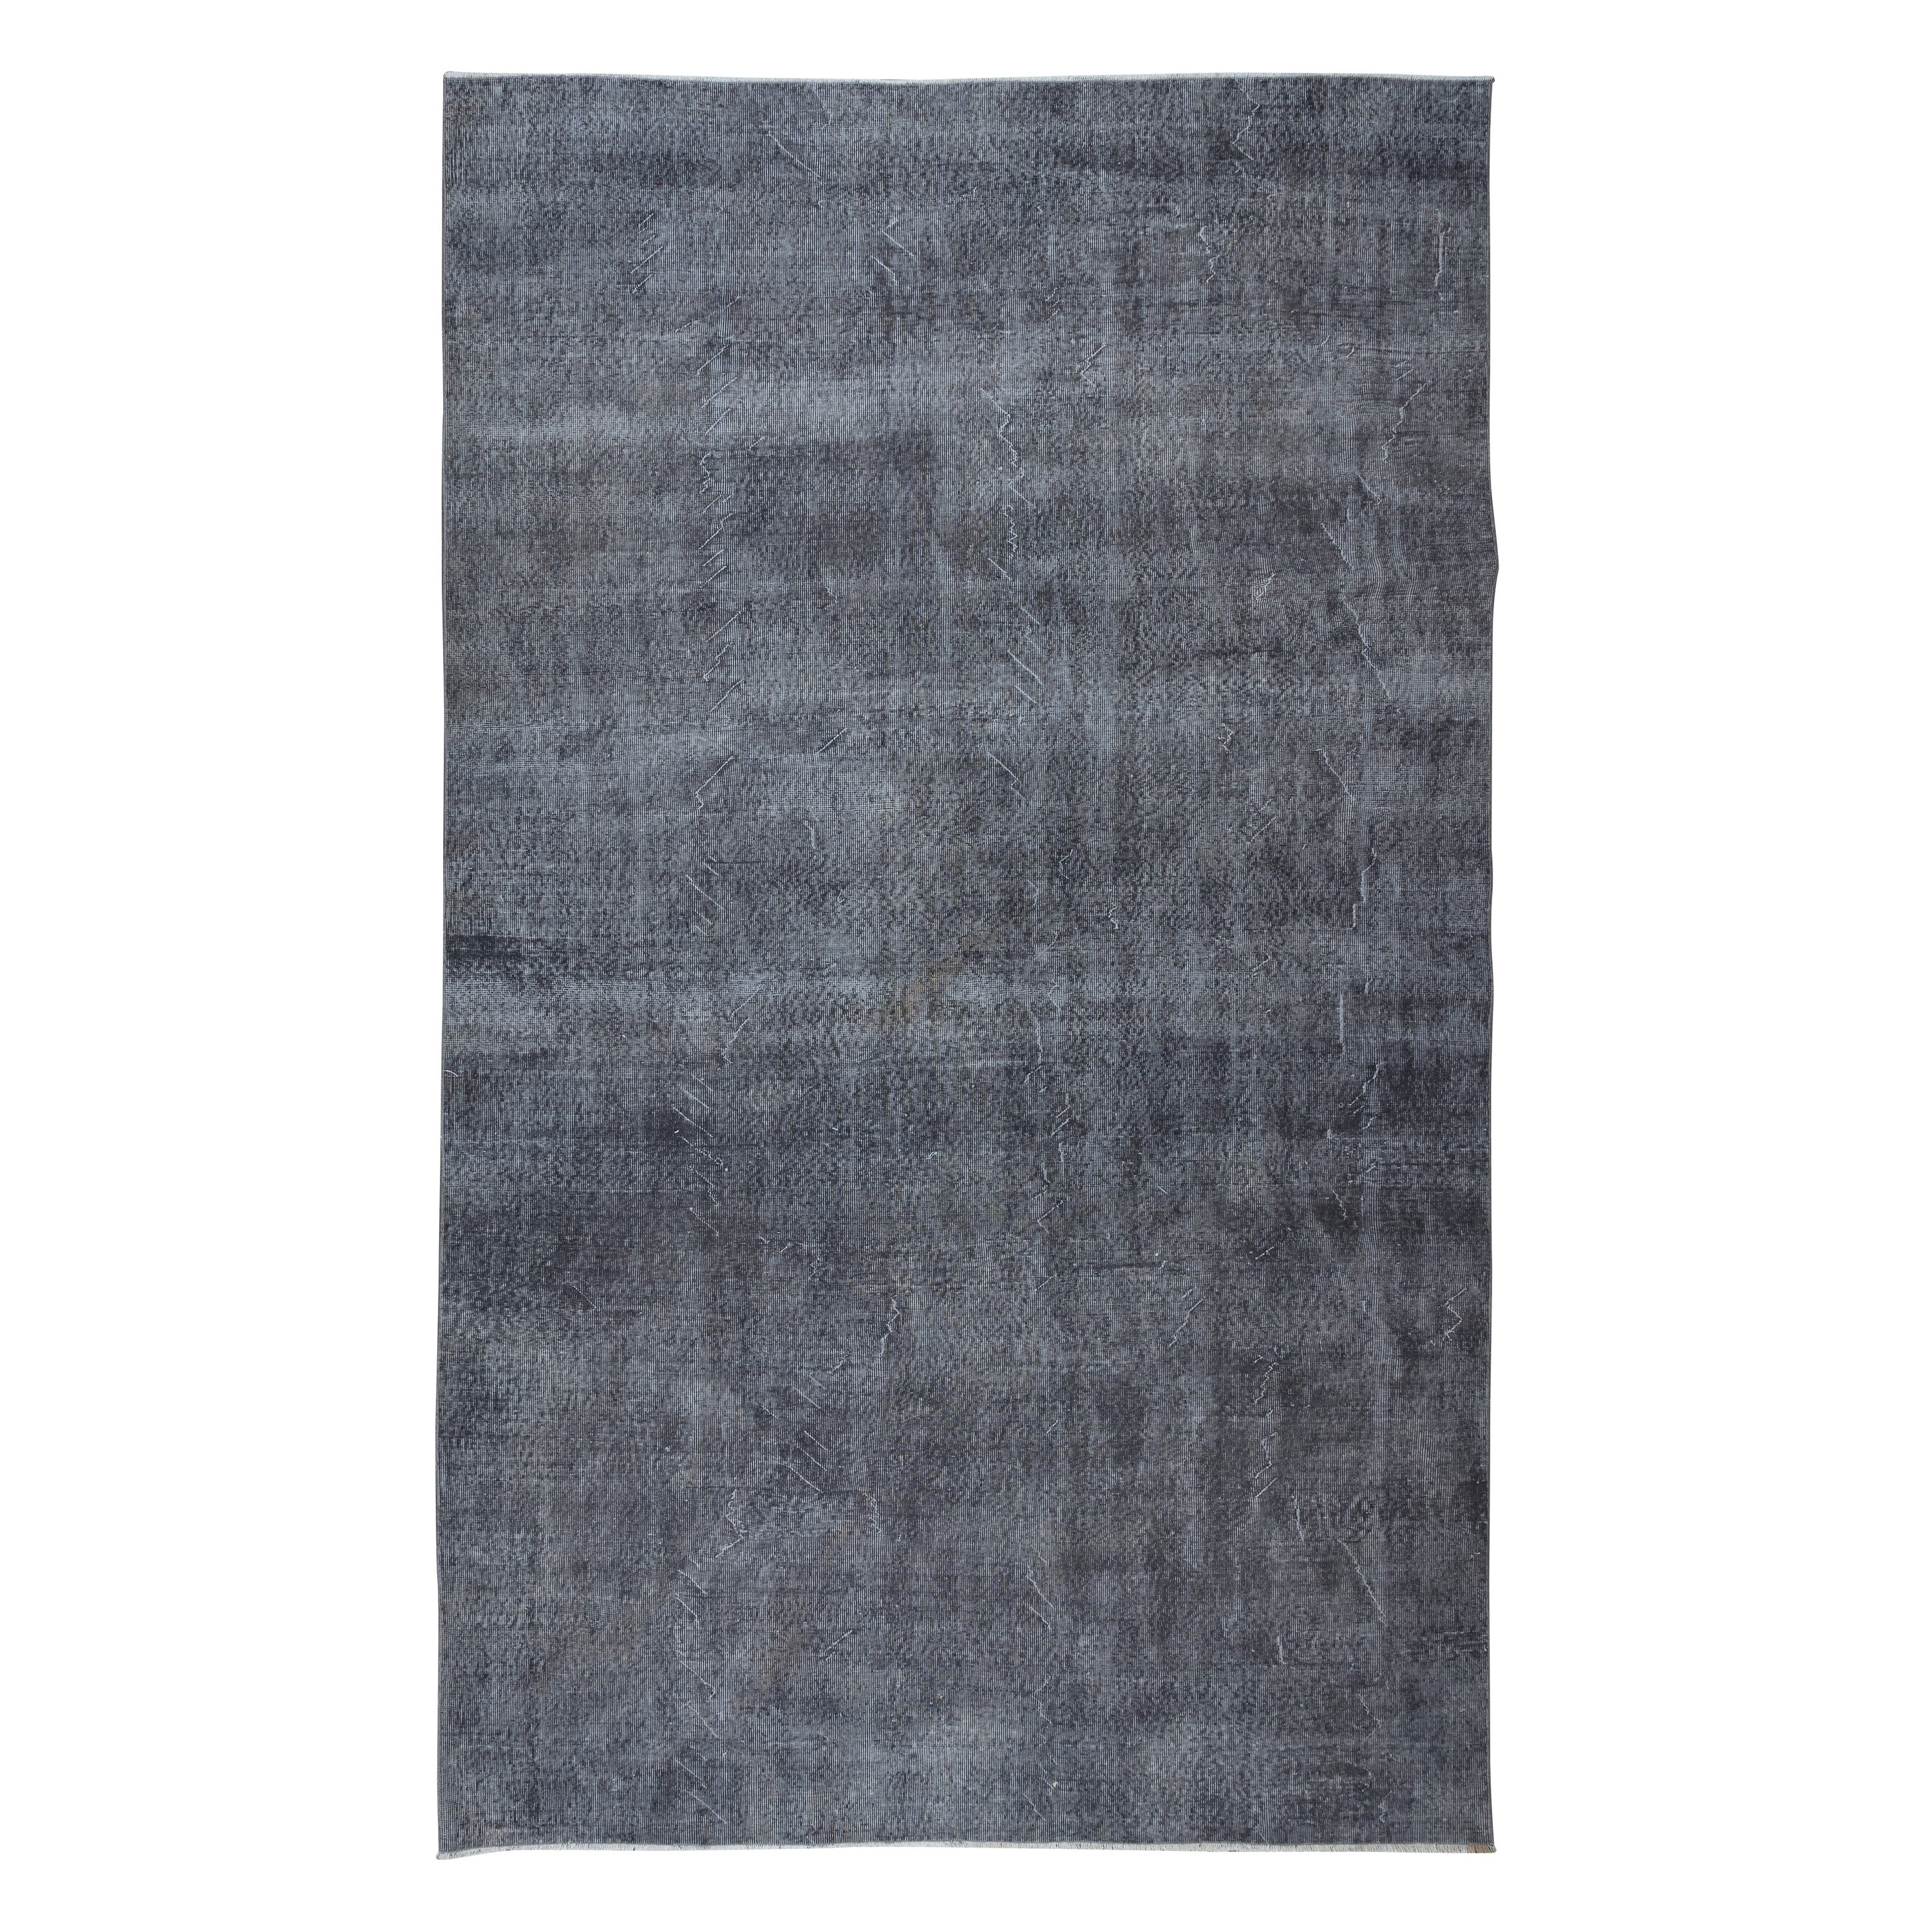 7.5x12.4 Ft Handmade Turkish Large Area Rug in Gray, Ideal for Modern Interiors For Sale